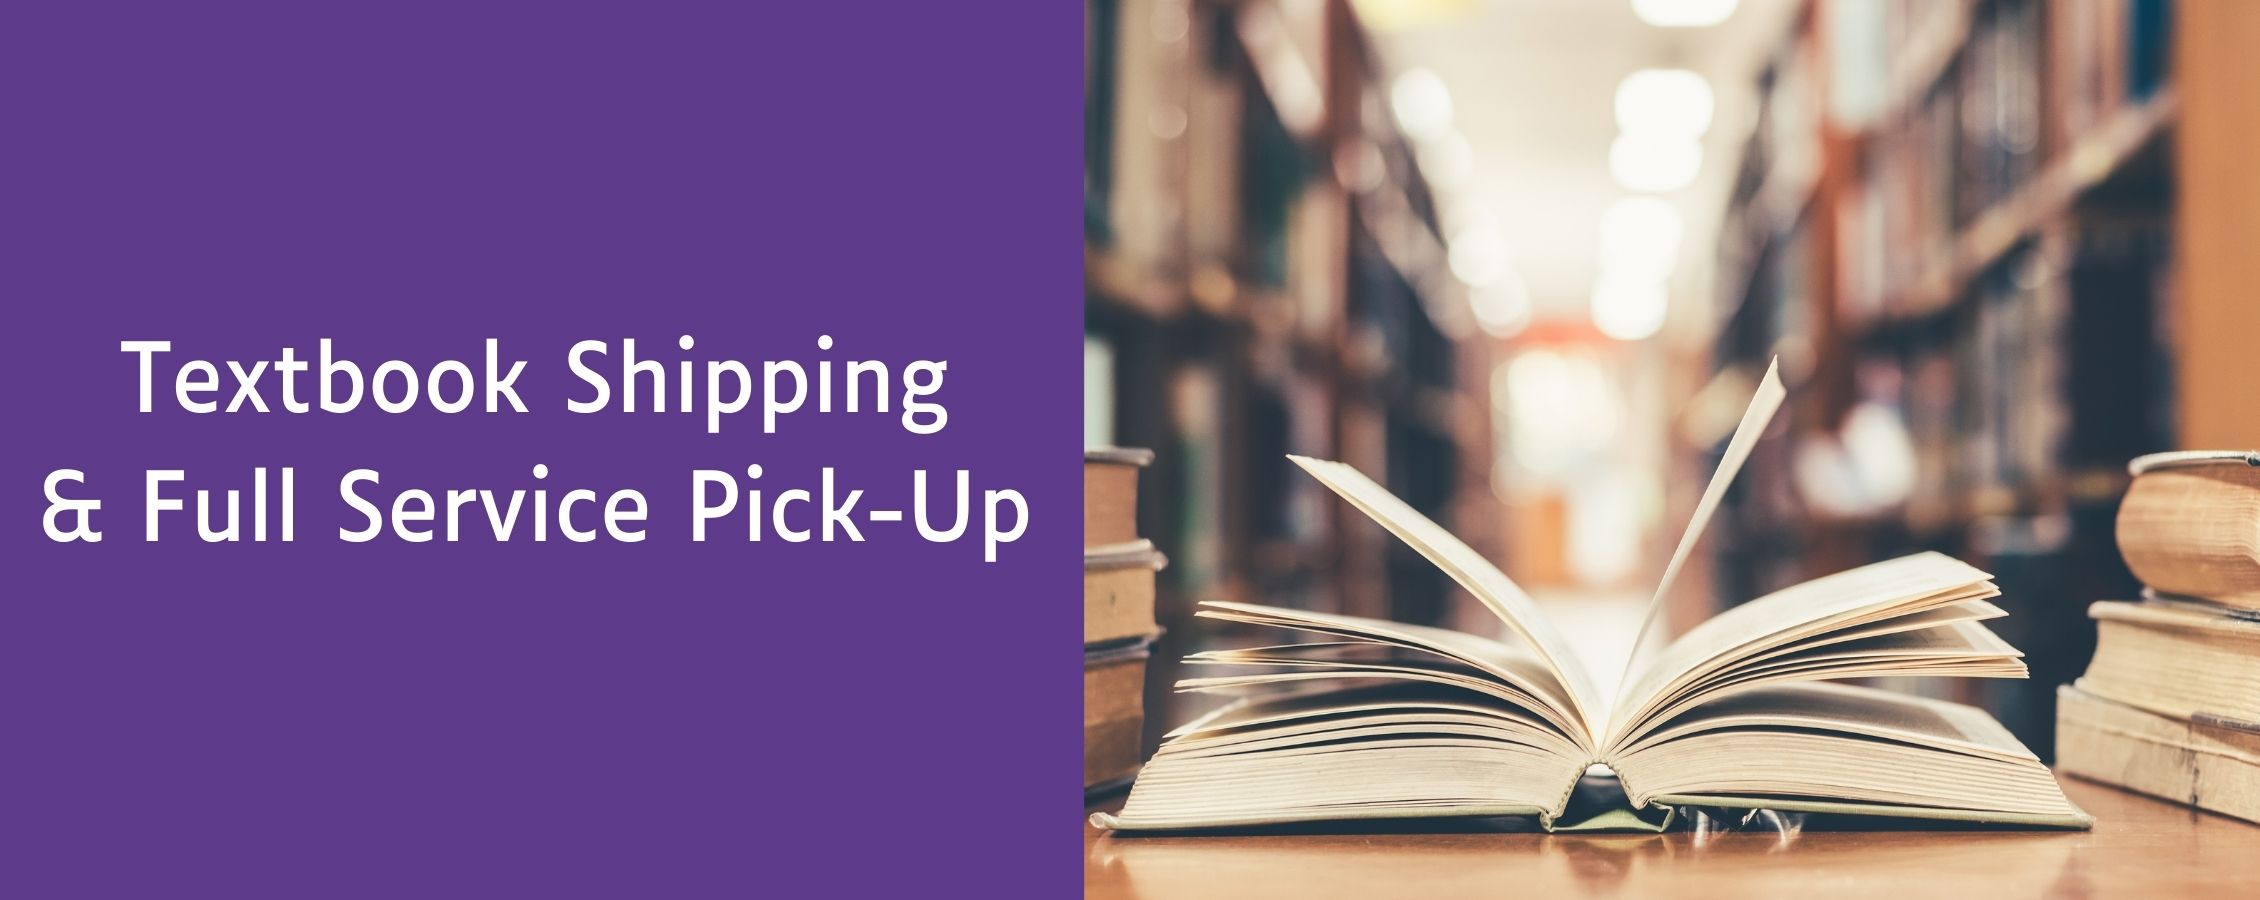 Shipping information for textbook rental at UW-Whitewater